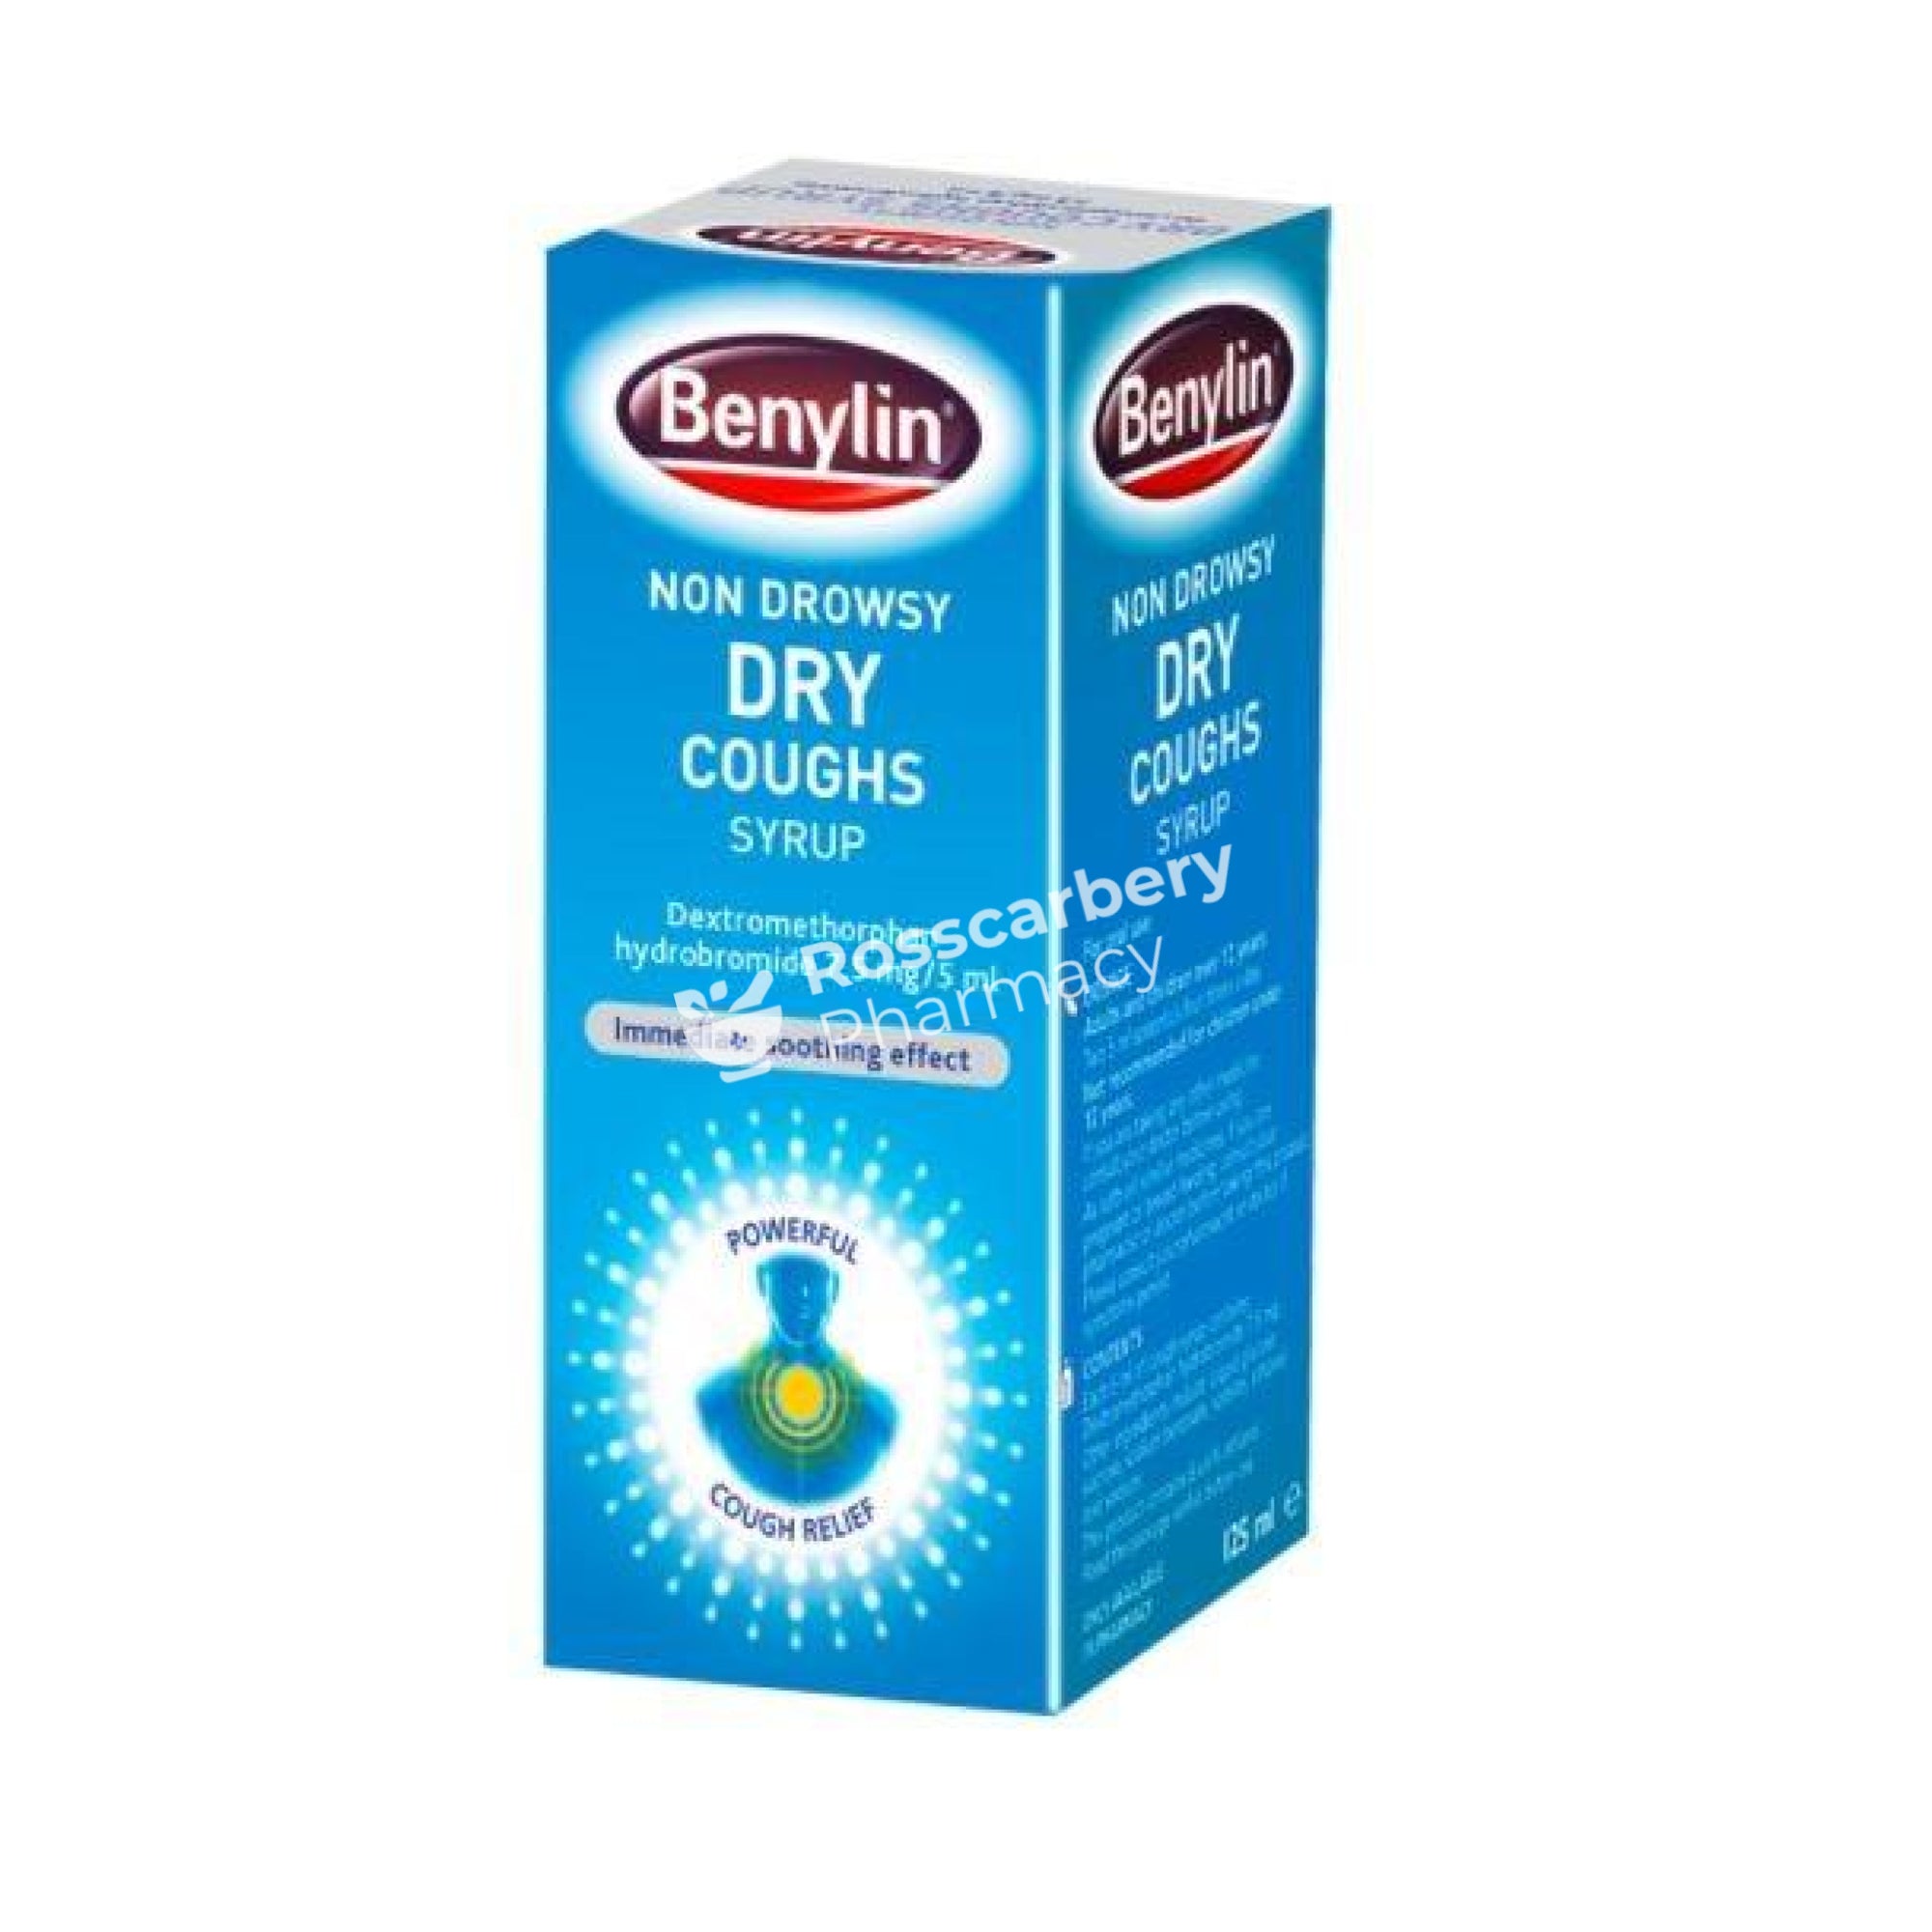 Benylin Non-Drowsy Dry Cough Syrup Bottles